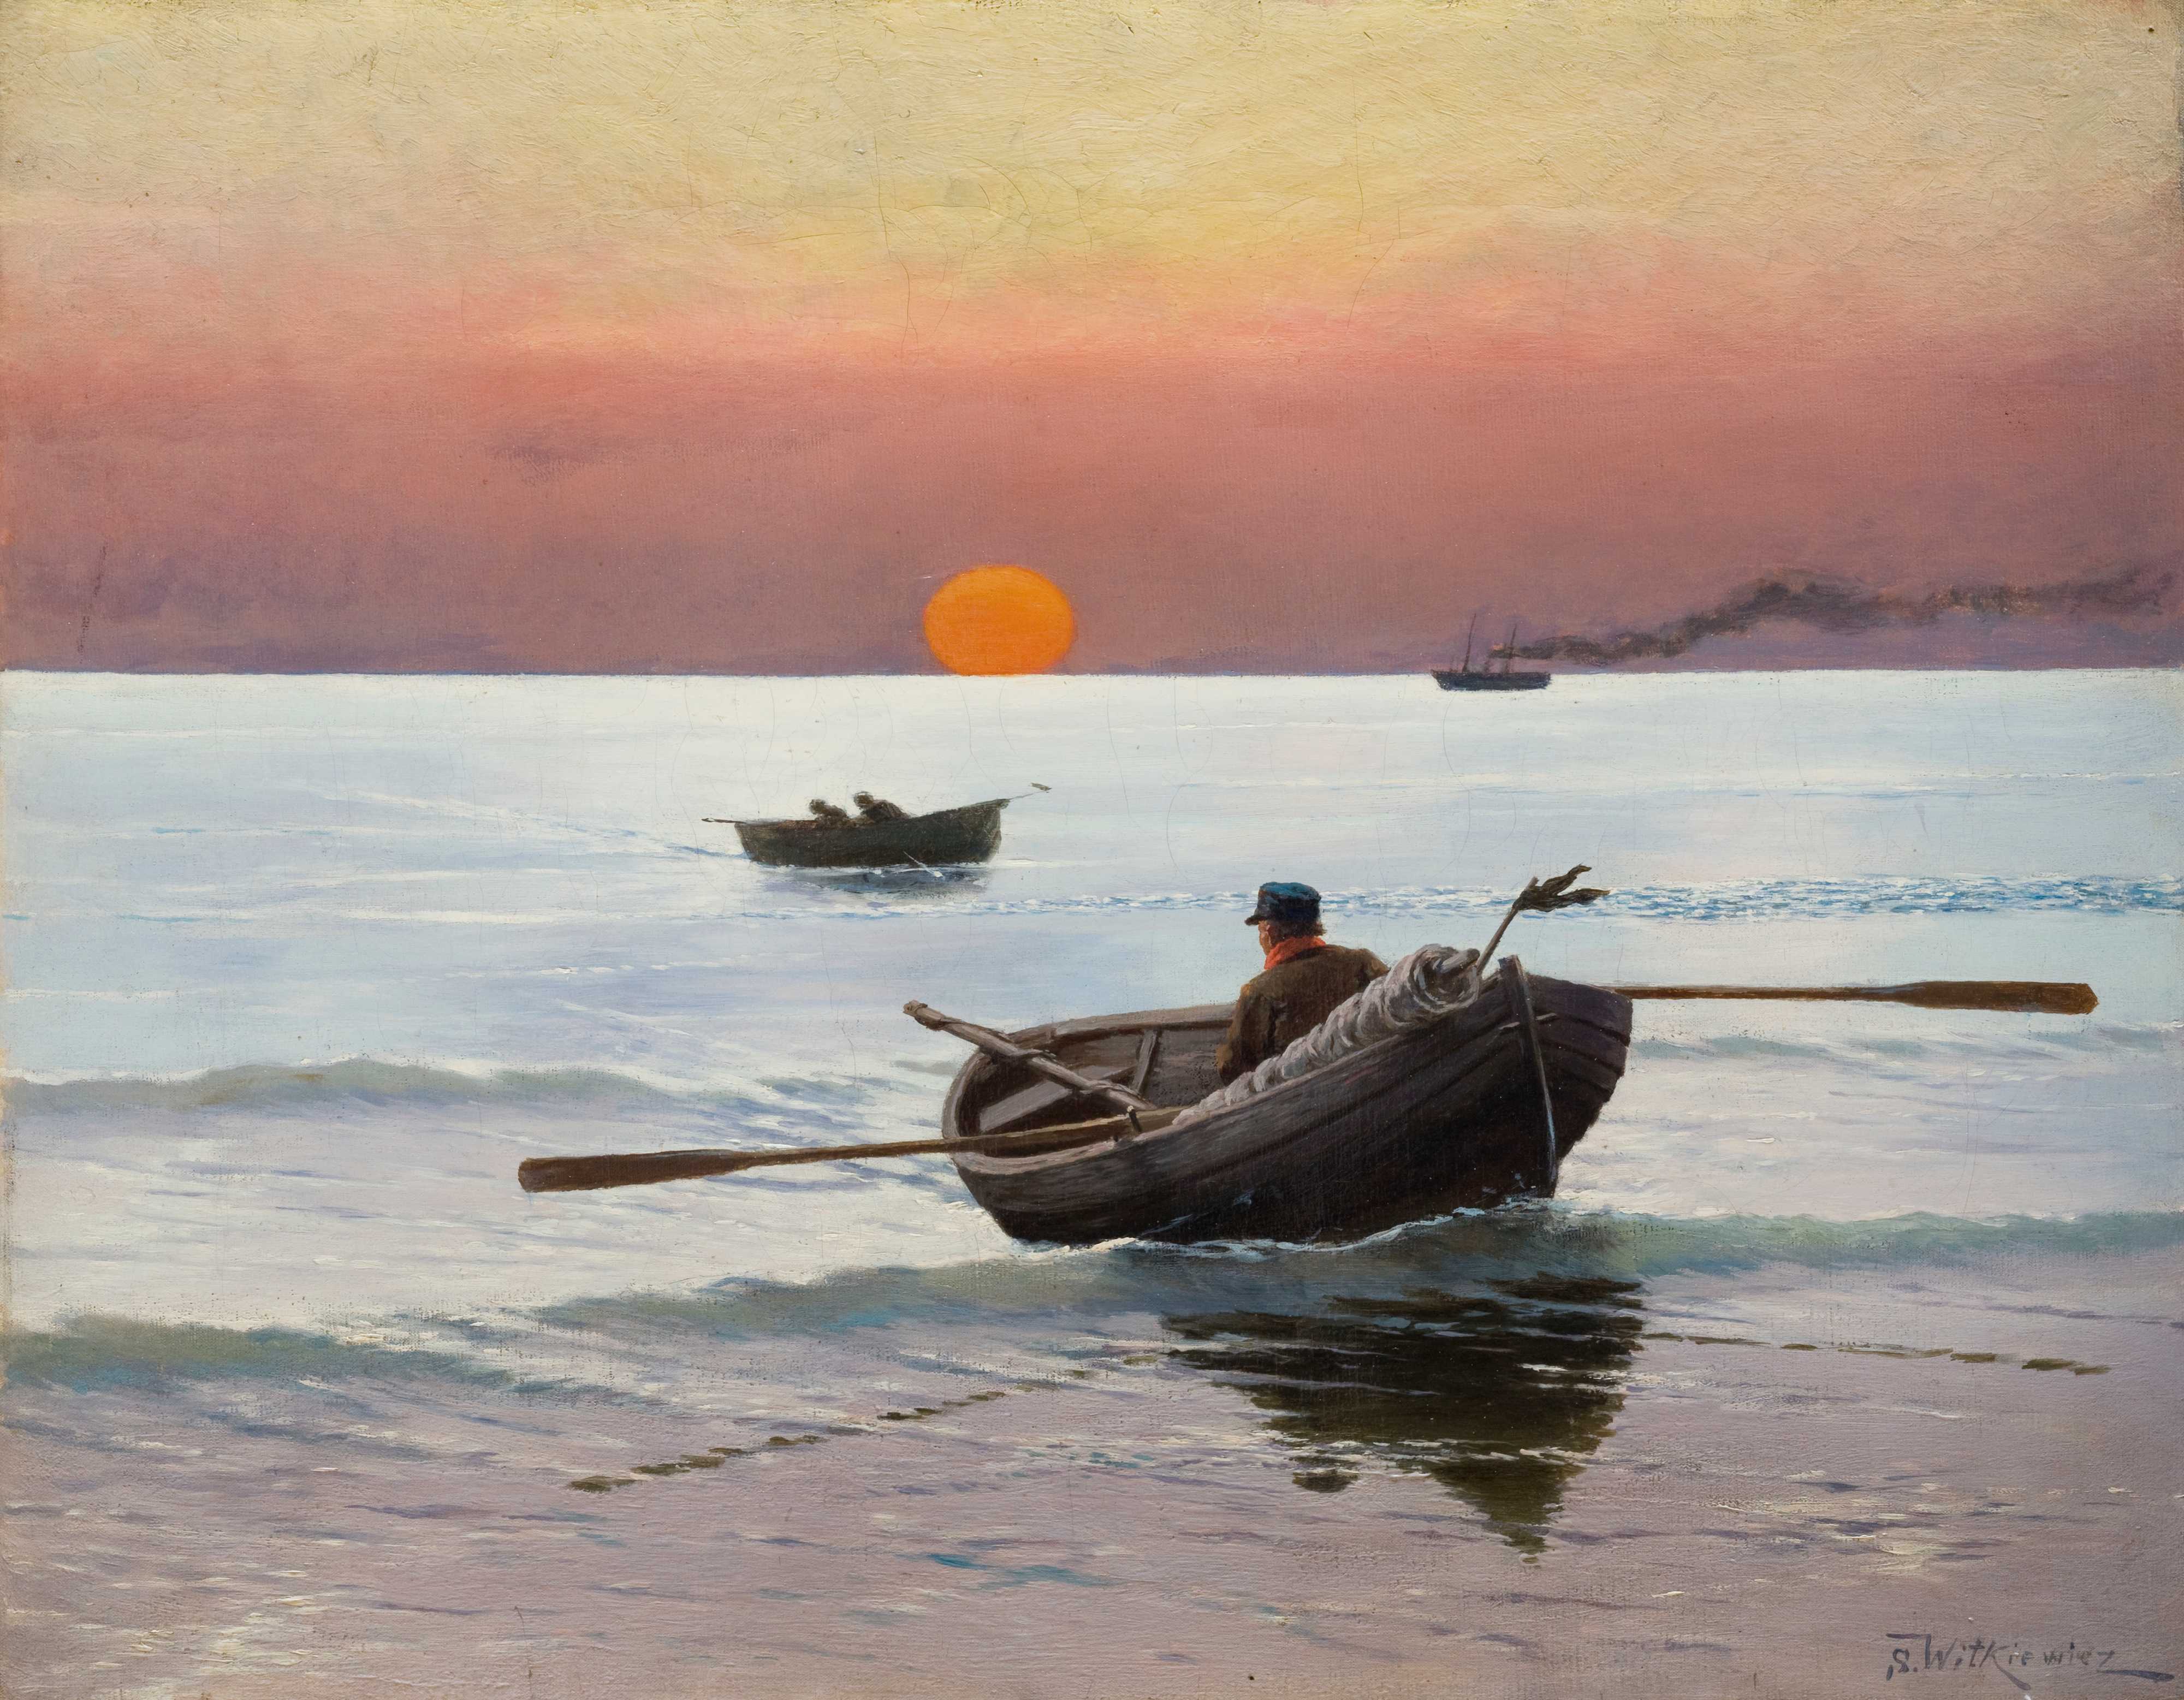 Find out more about Stanisław Witkiewicz - Sunset on the Sea